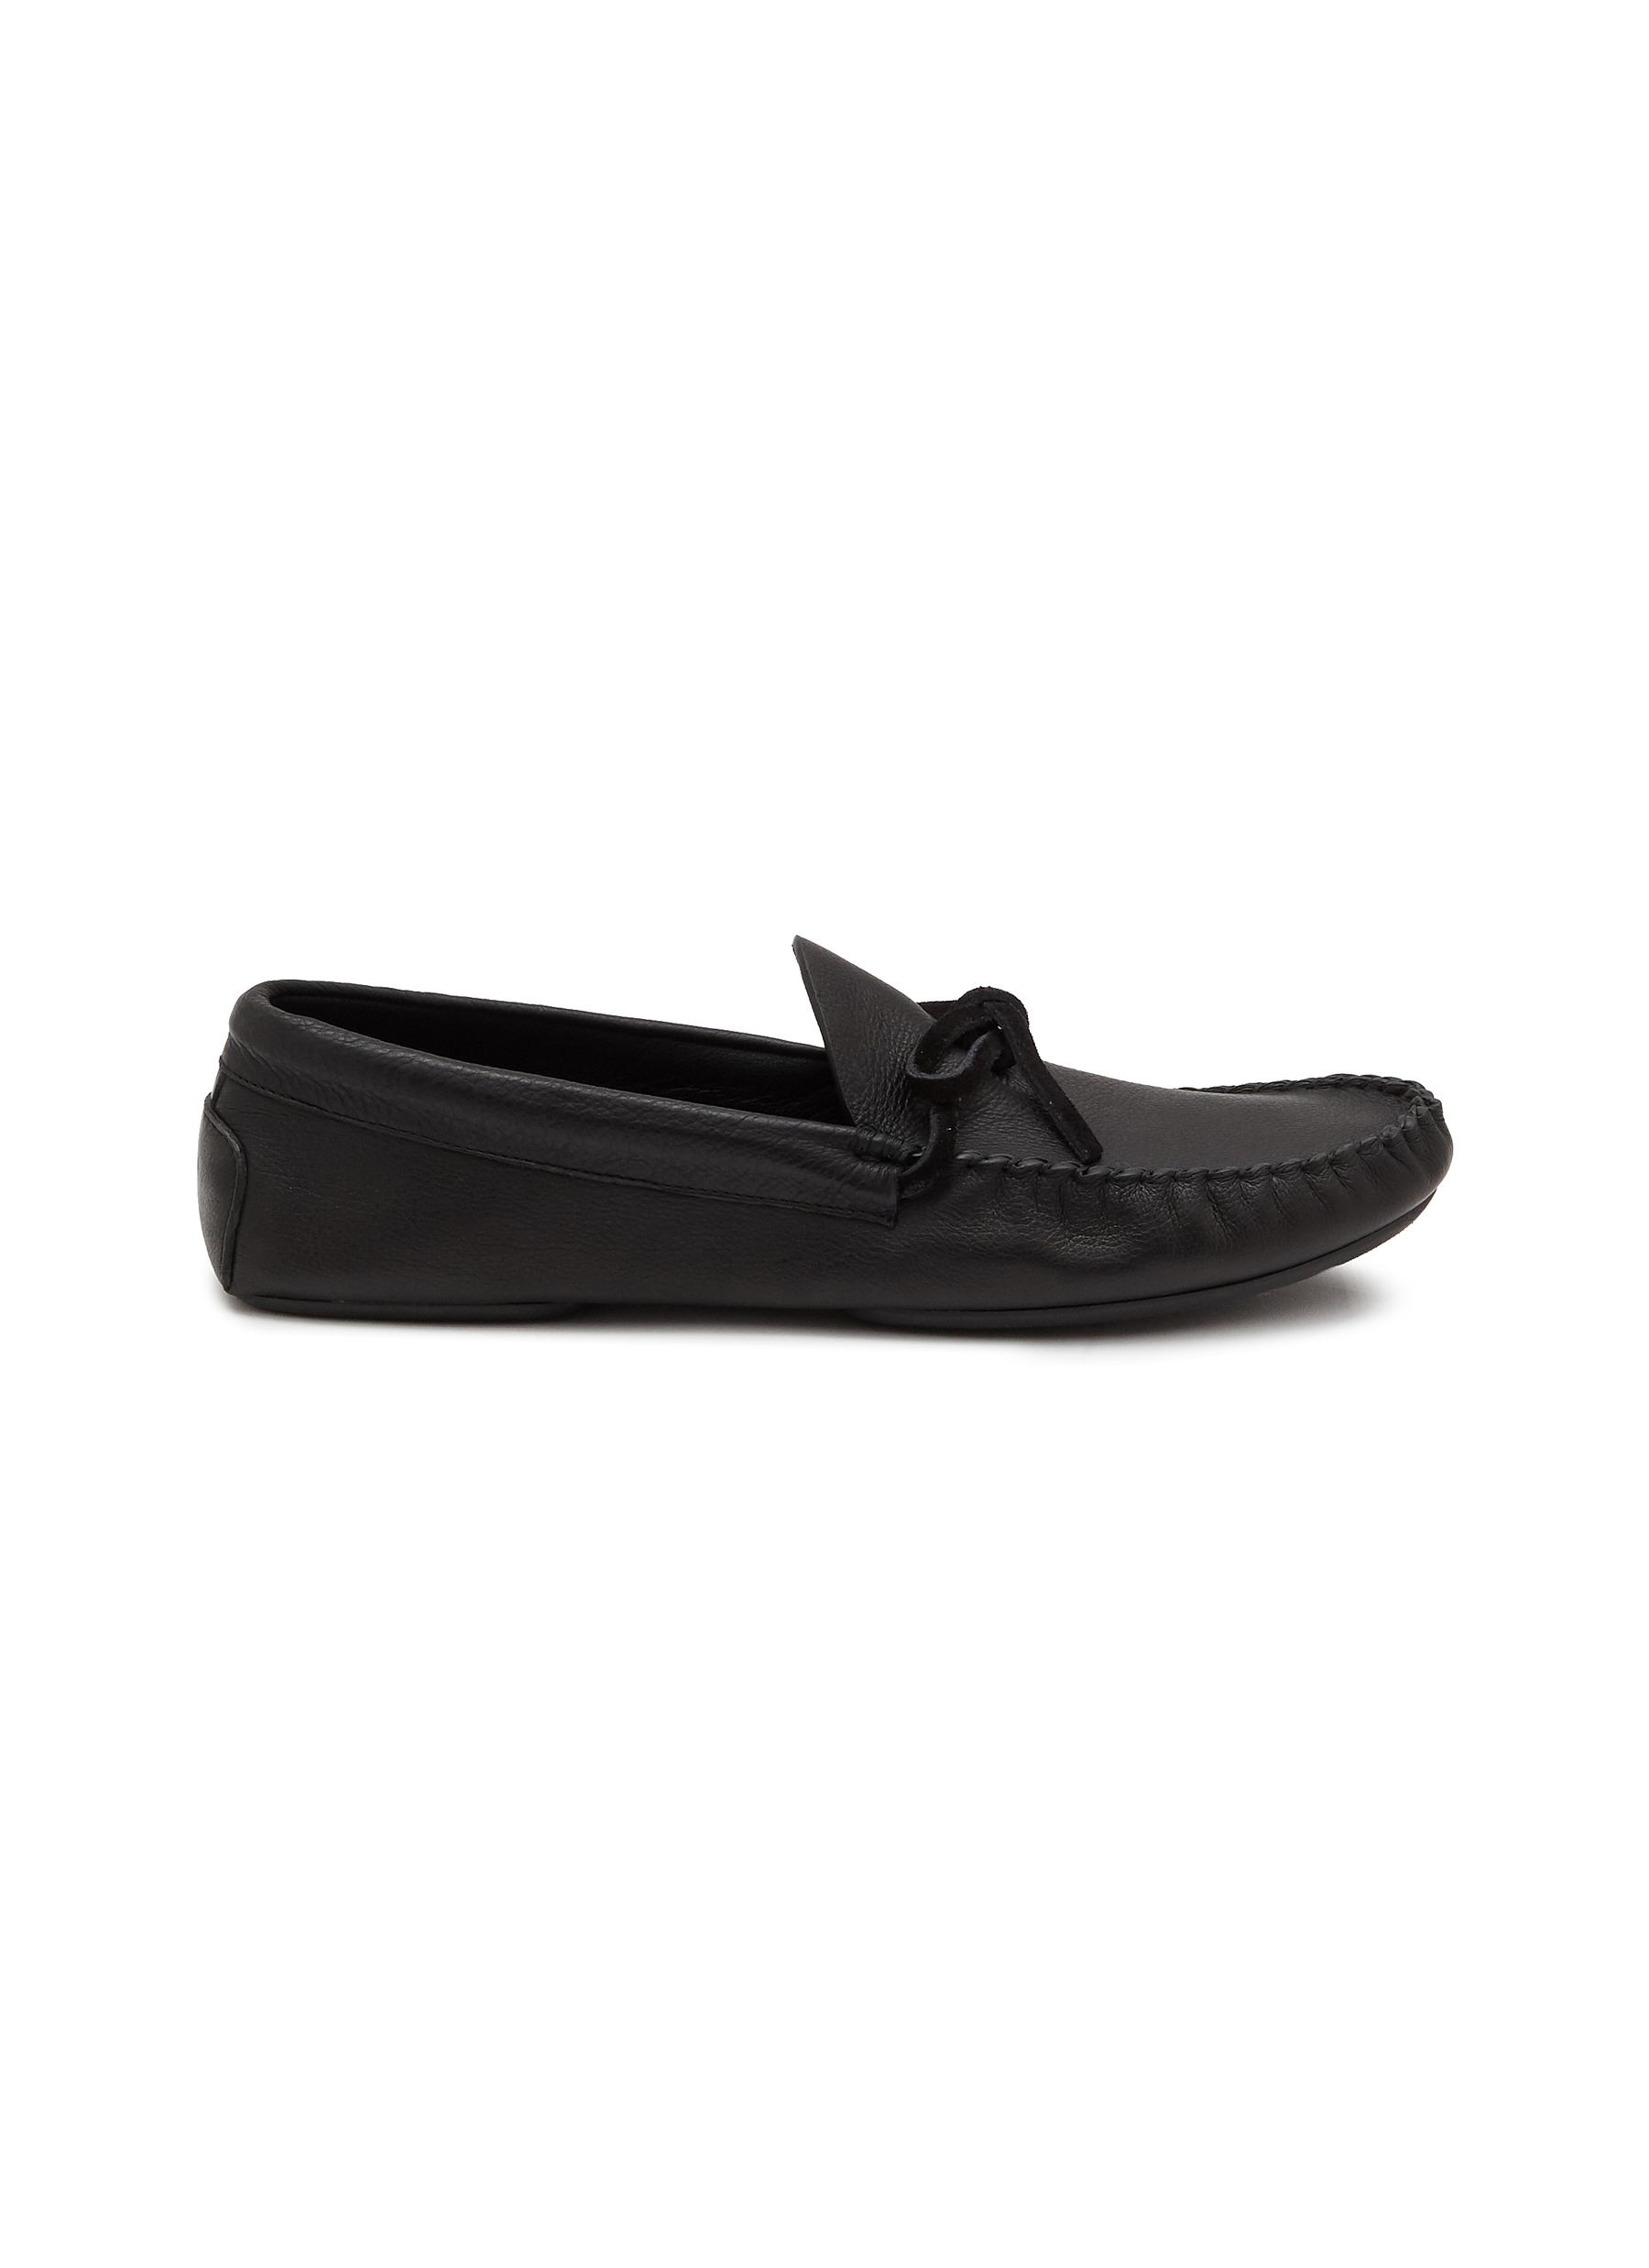 Lucca Vegetable Leather Moccasins